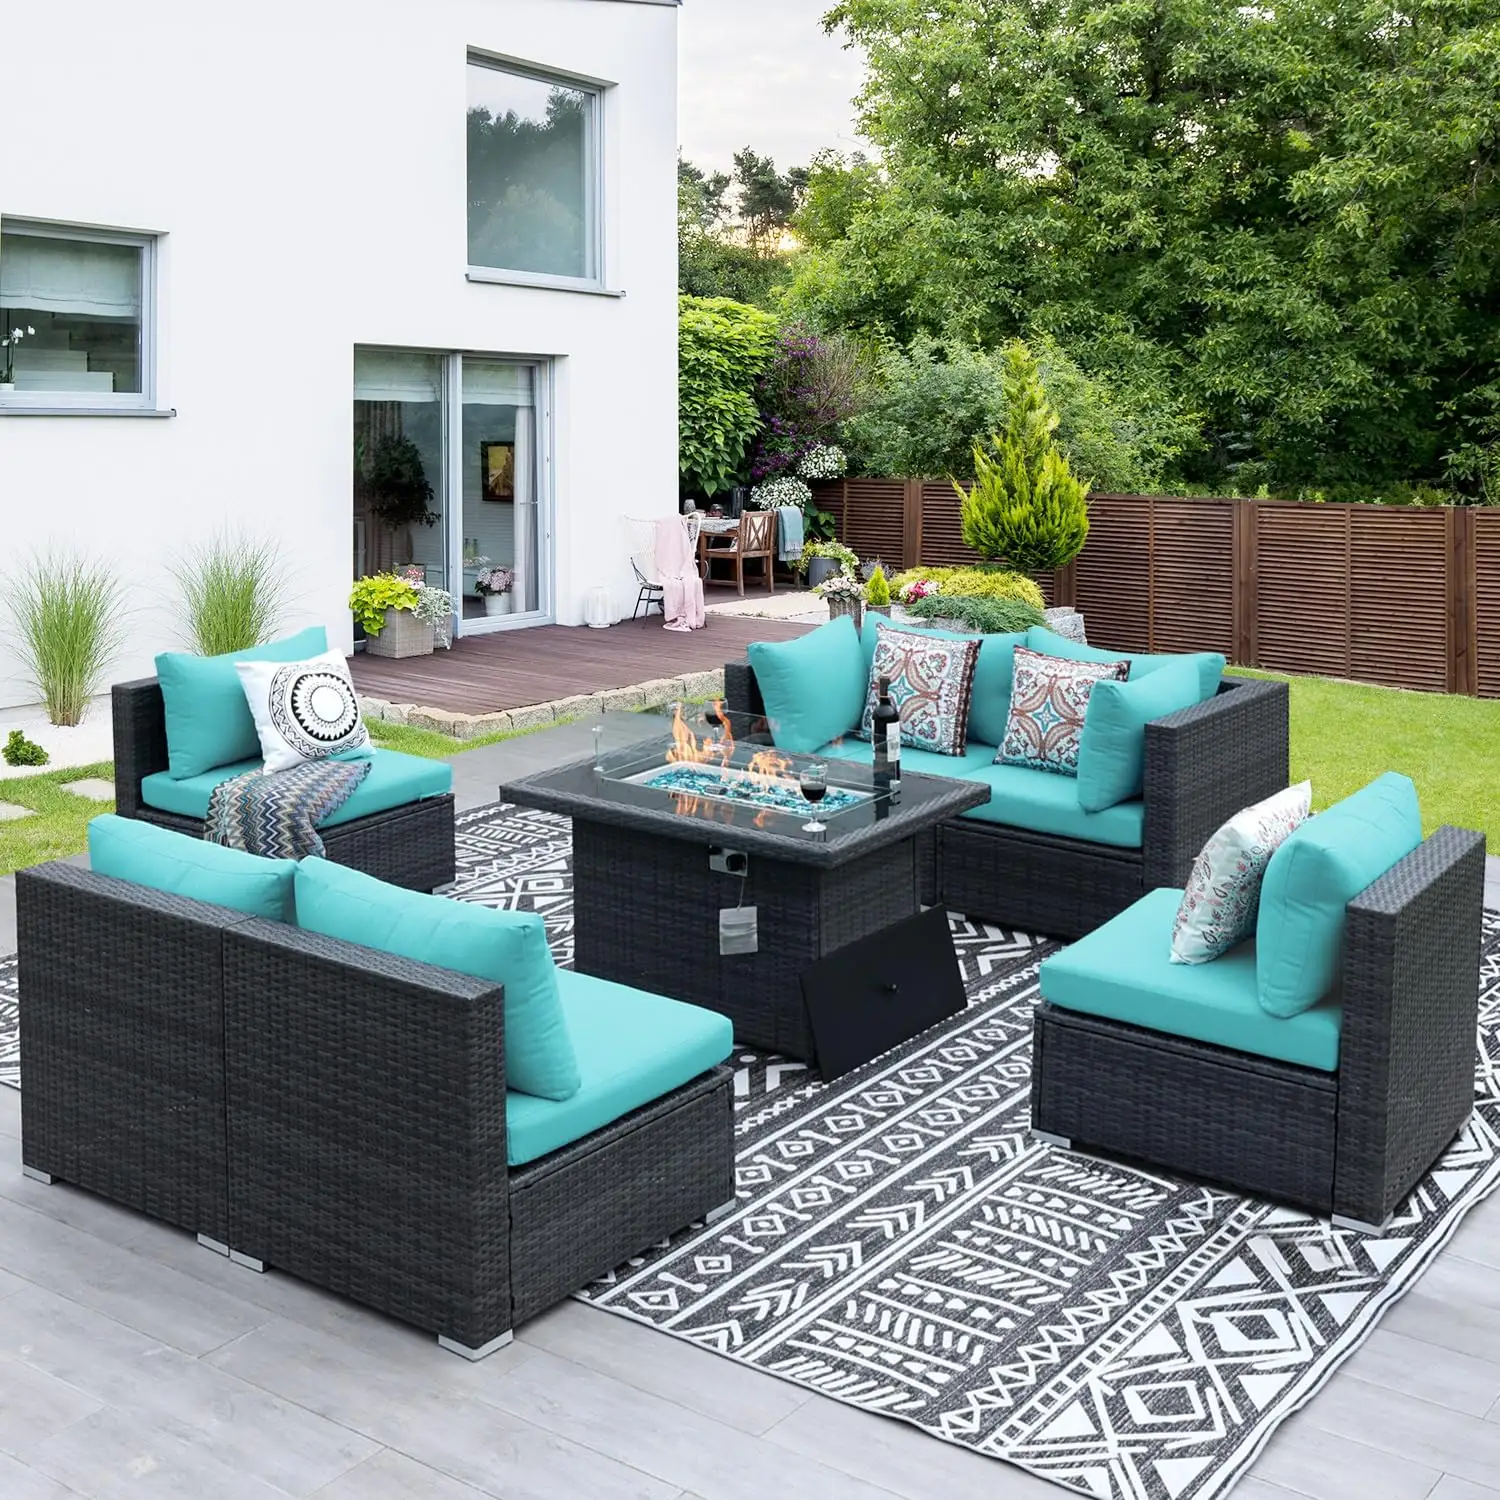 Altovis luxury outdoor seating group PE rattan modern garden furniture sofa set with fire pit table